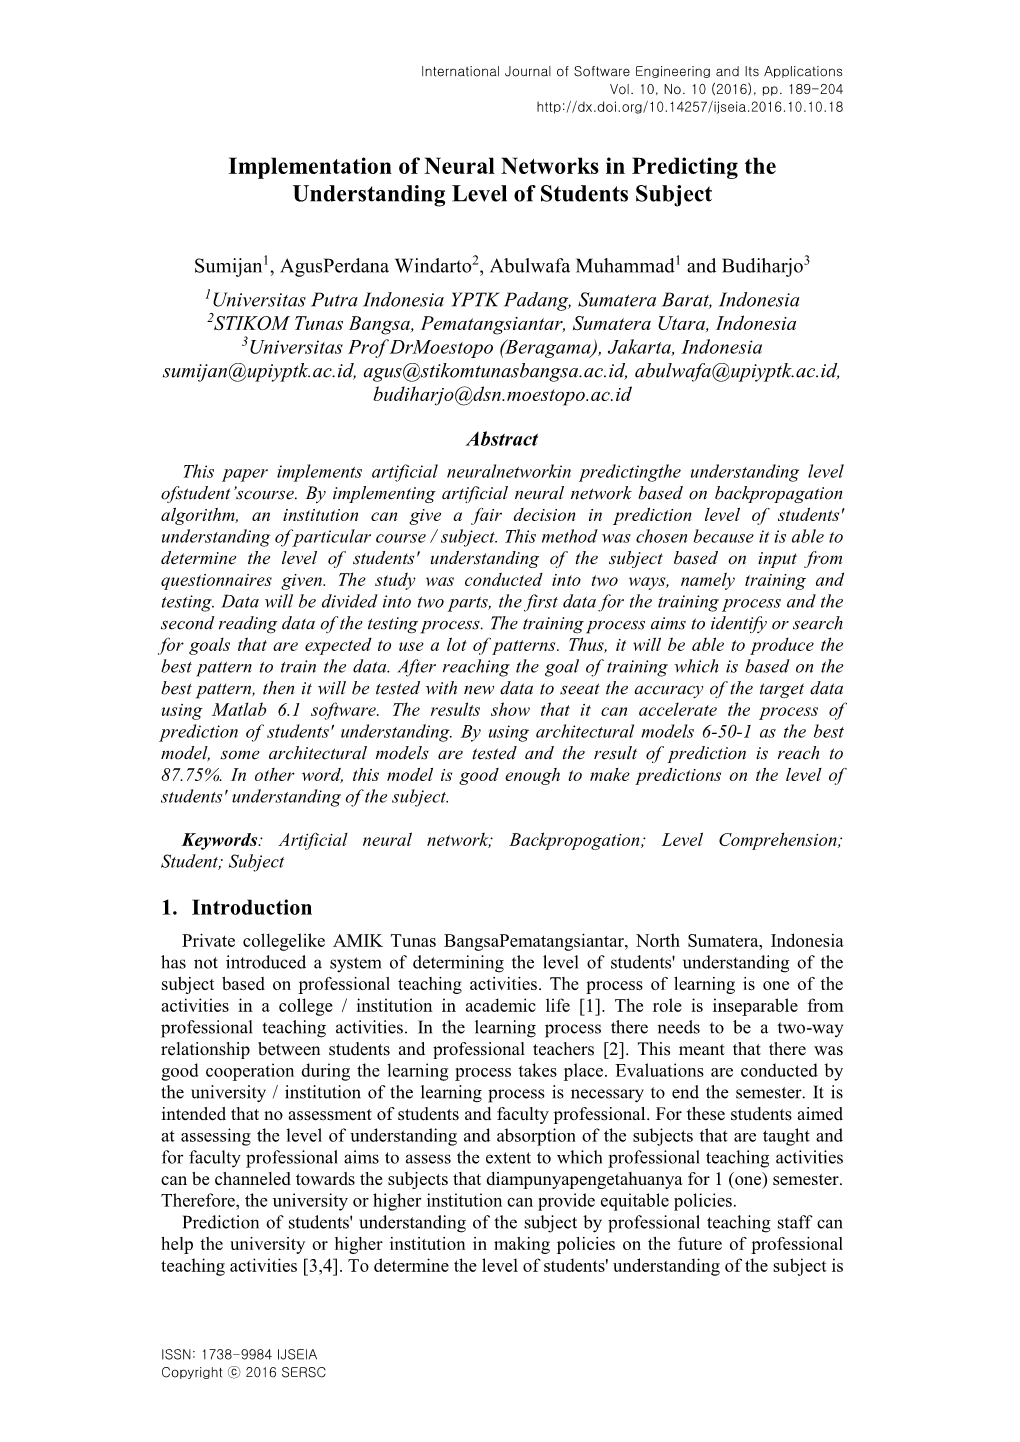 Implementation of Neural Networks in Predicting the Understanding Level of Students Subject